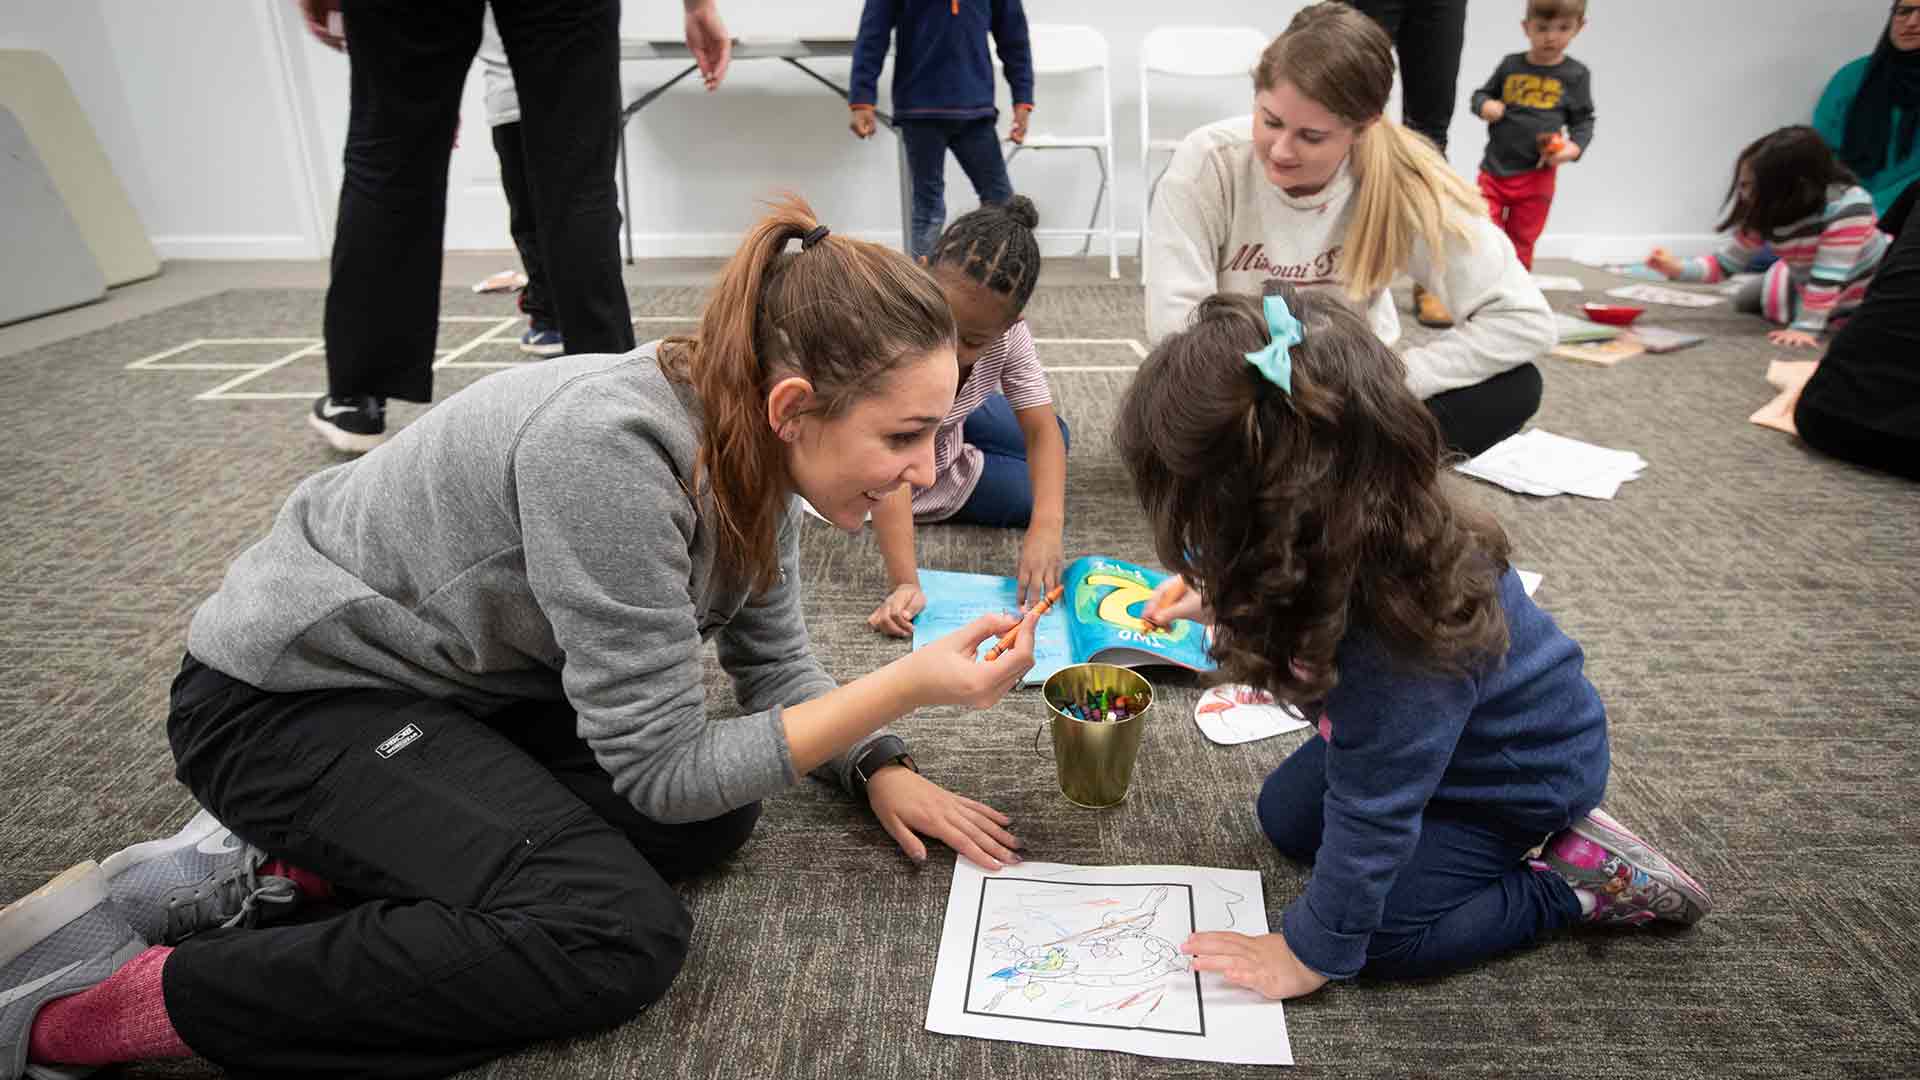 A speech-language student and a young child color together on a sheet of paper during a community event.